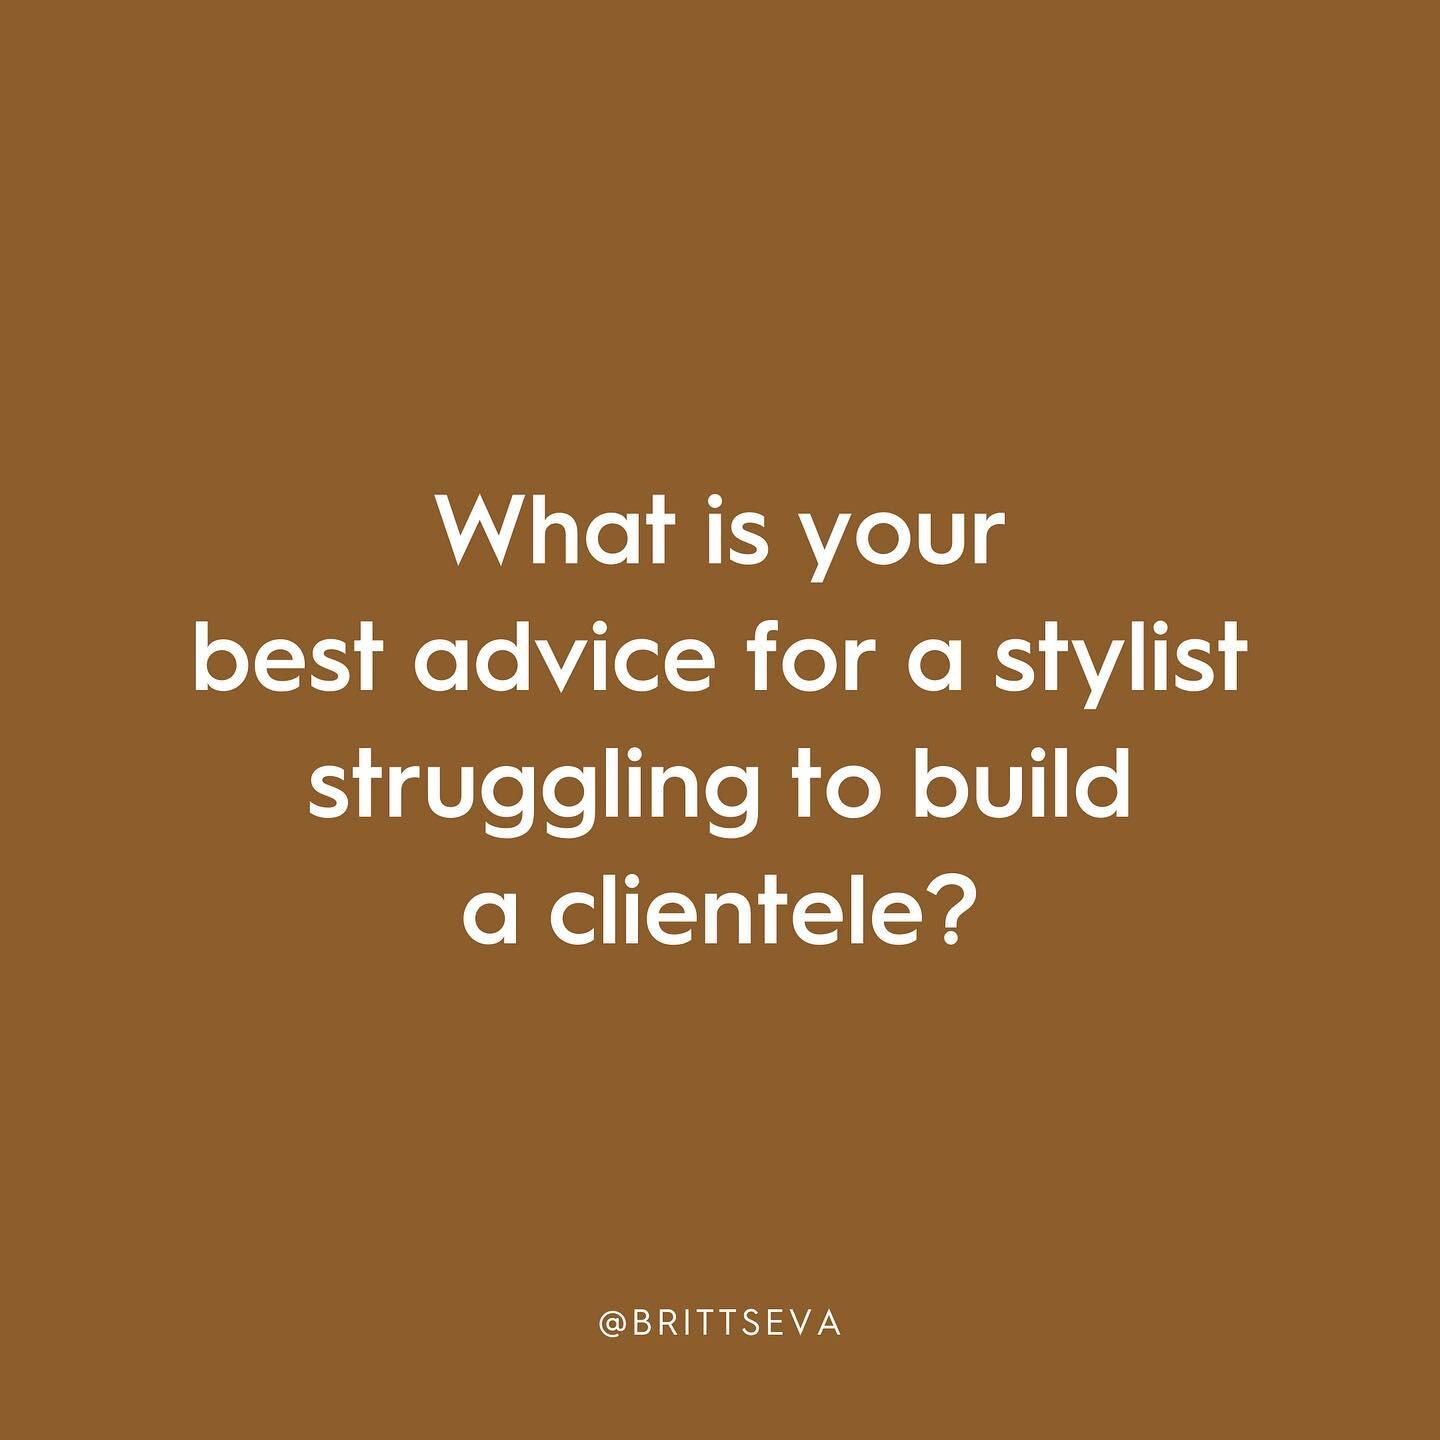 When I was a new stylist, the clientele-building advice I heard over and over sounded like nails on a chalkboard:⁠
⁠
👎🏻 &quot;Be patient...it's going to take time.&quot;⁠
👎🏻 &quot;Hand out three business cards a day.&rdquo;⁠
👎🏻 &quot;Market you